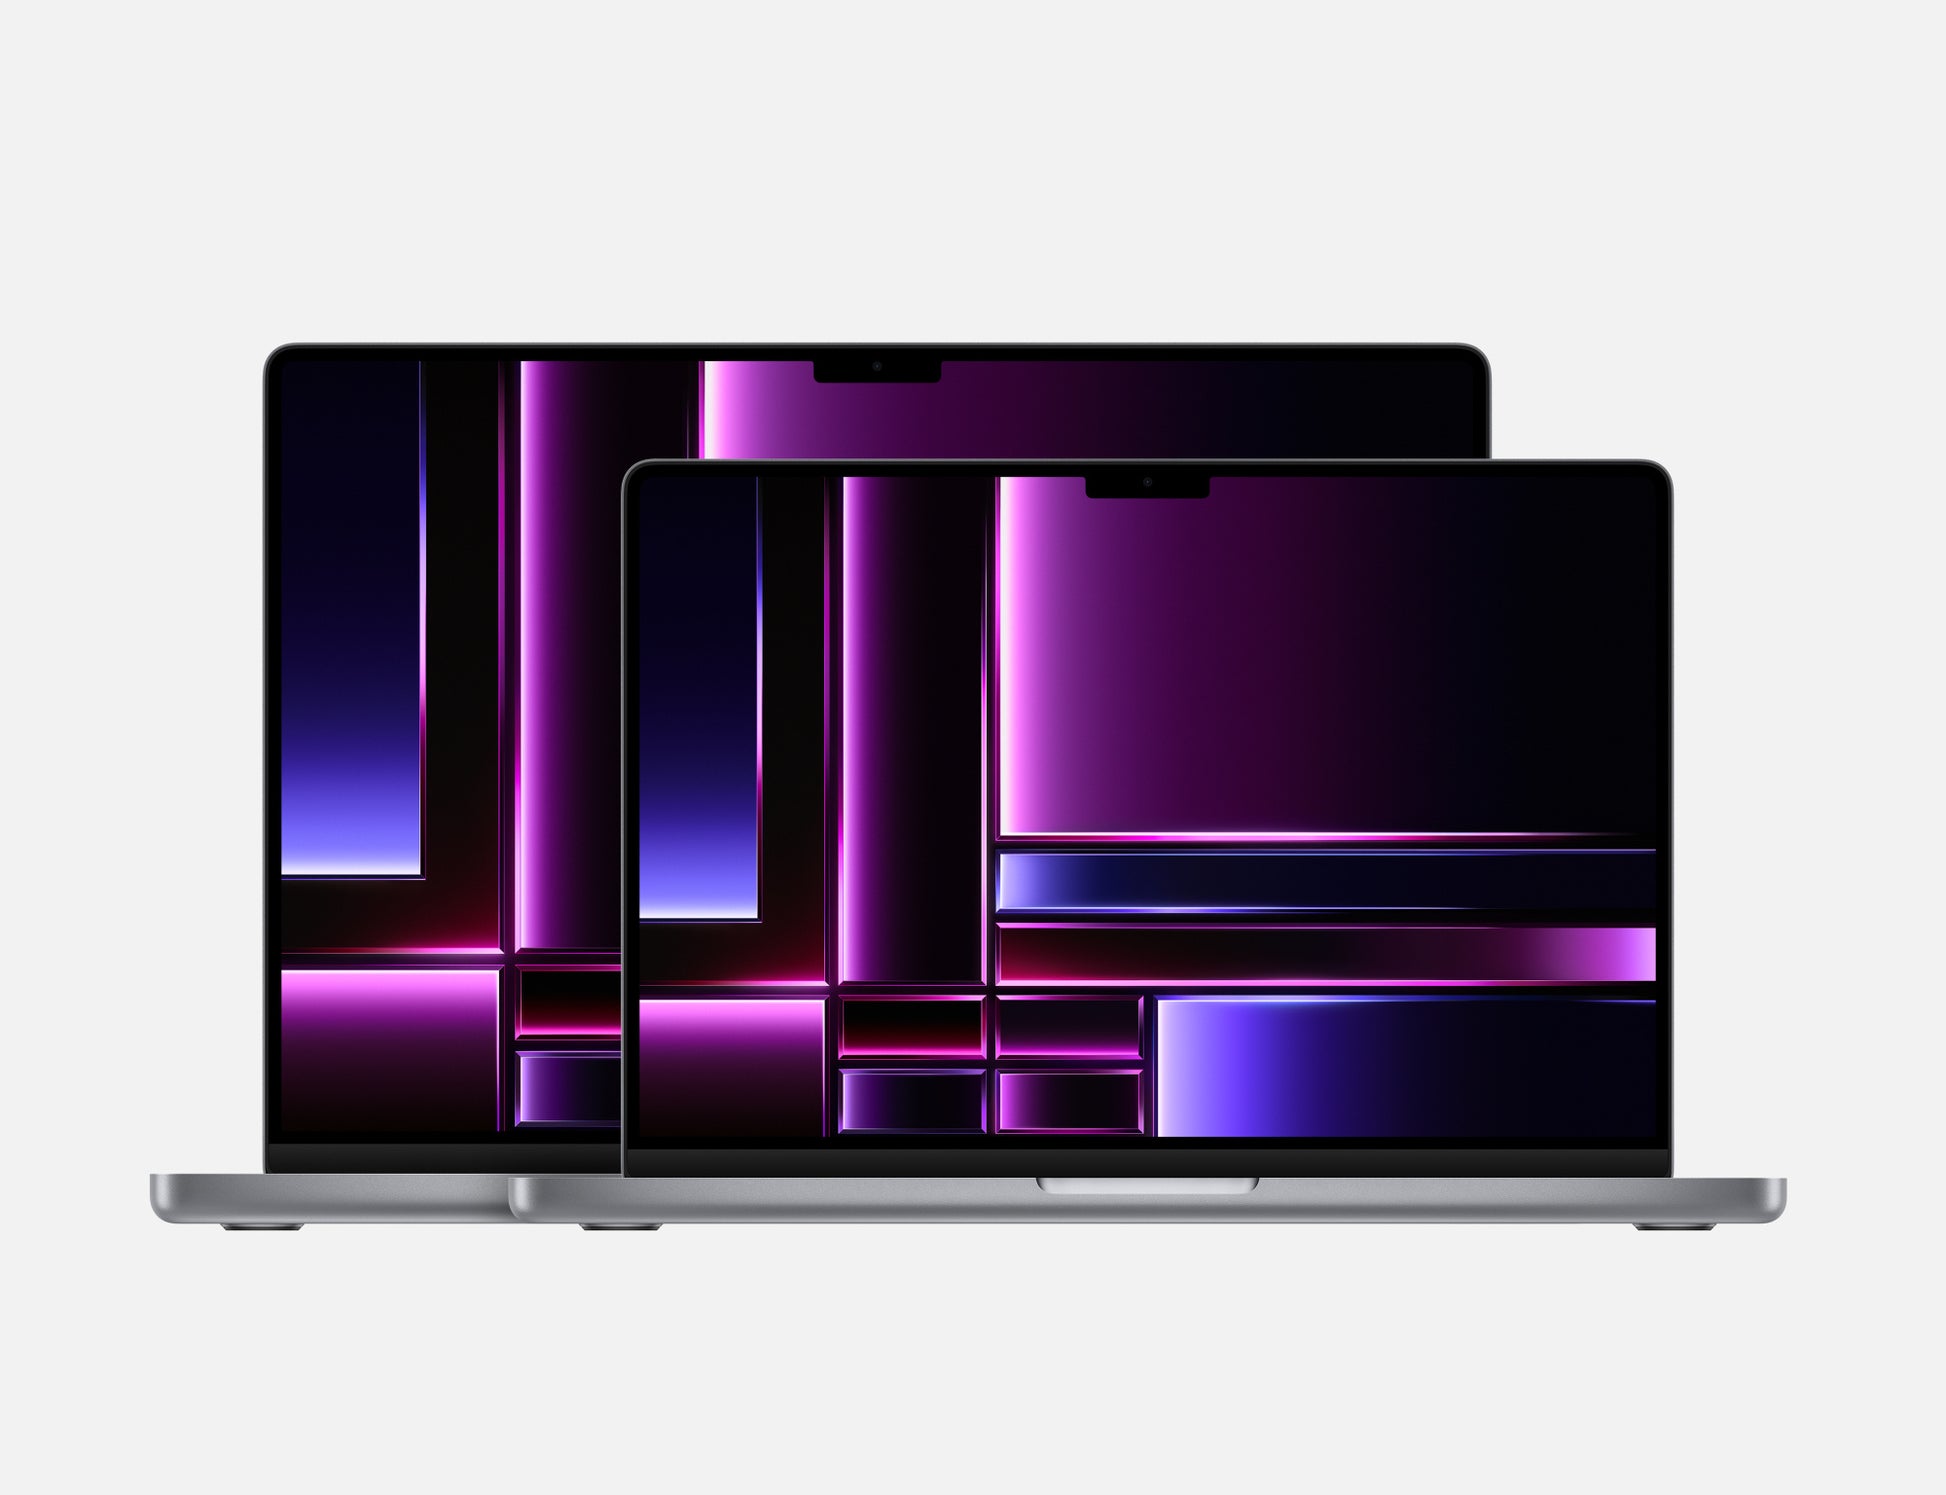 The Apple MacBook Pro 14'' M2 Max is a high-performance laptop designed for professionals. With 32GB of memory and 1TB of storage, it delivers top-of-the-line performance and portability in a sleek design.